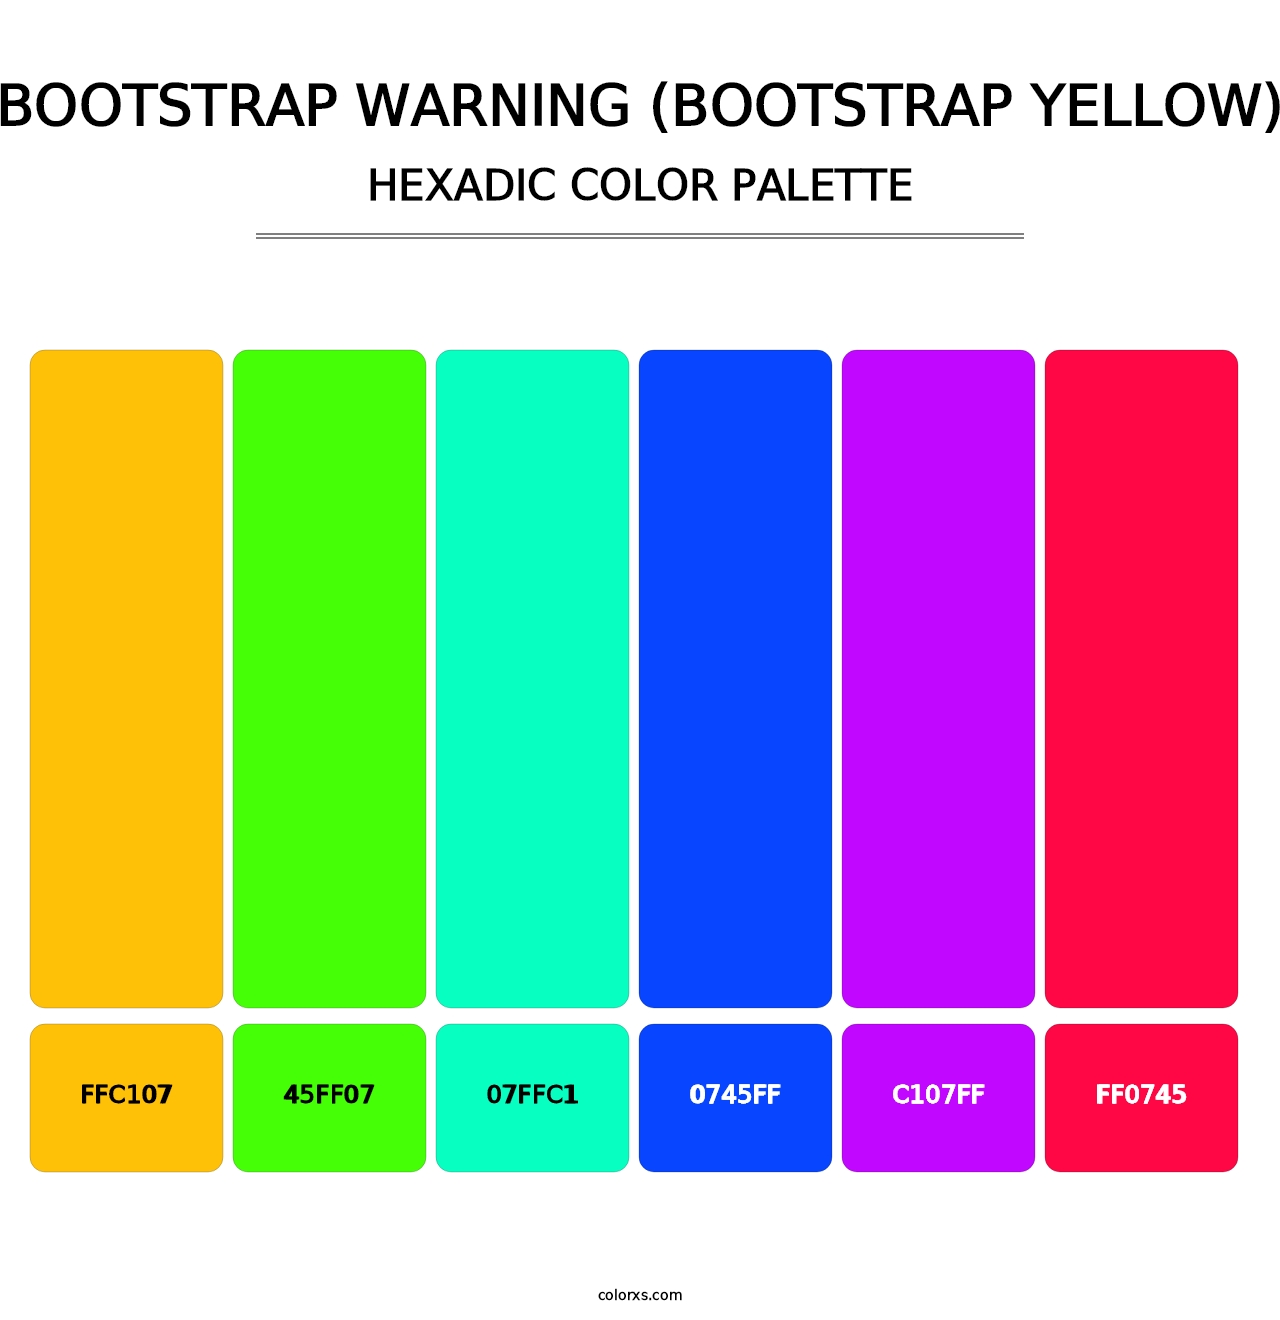 Bootstrap Warning (Bootstrap Yellow) - Hexadic Color Palette